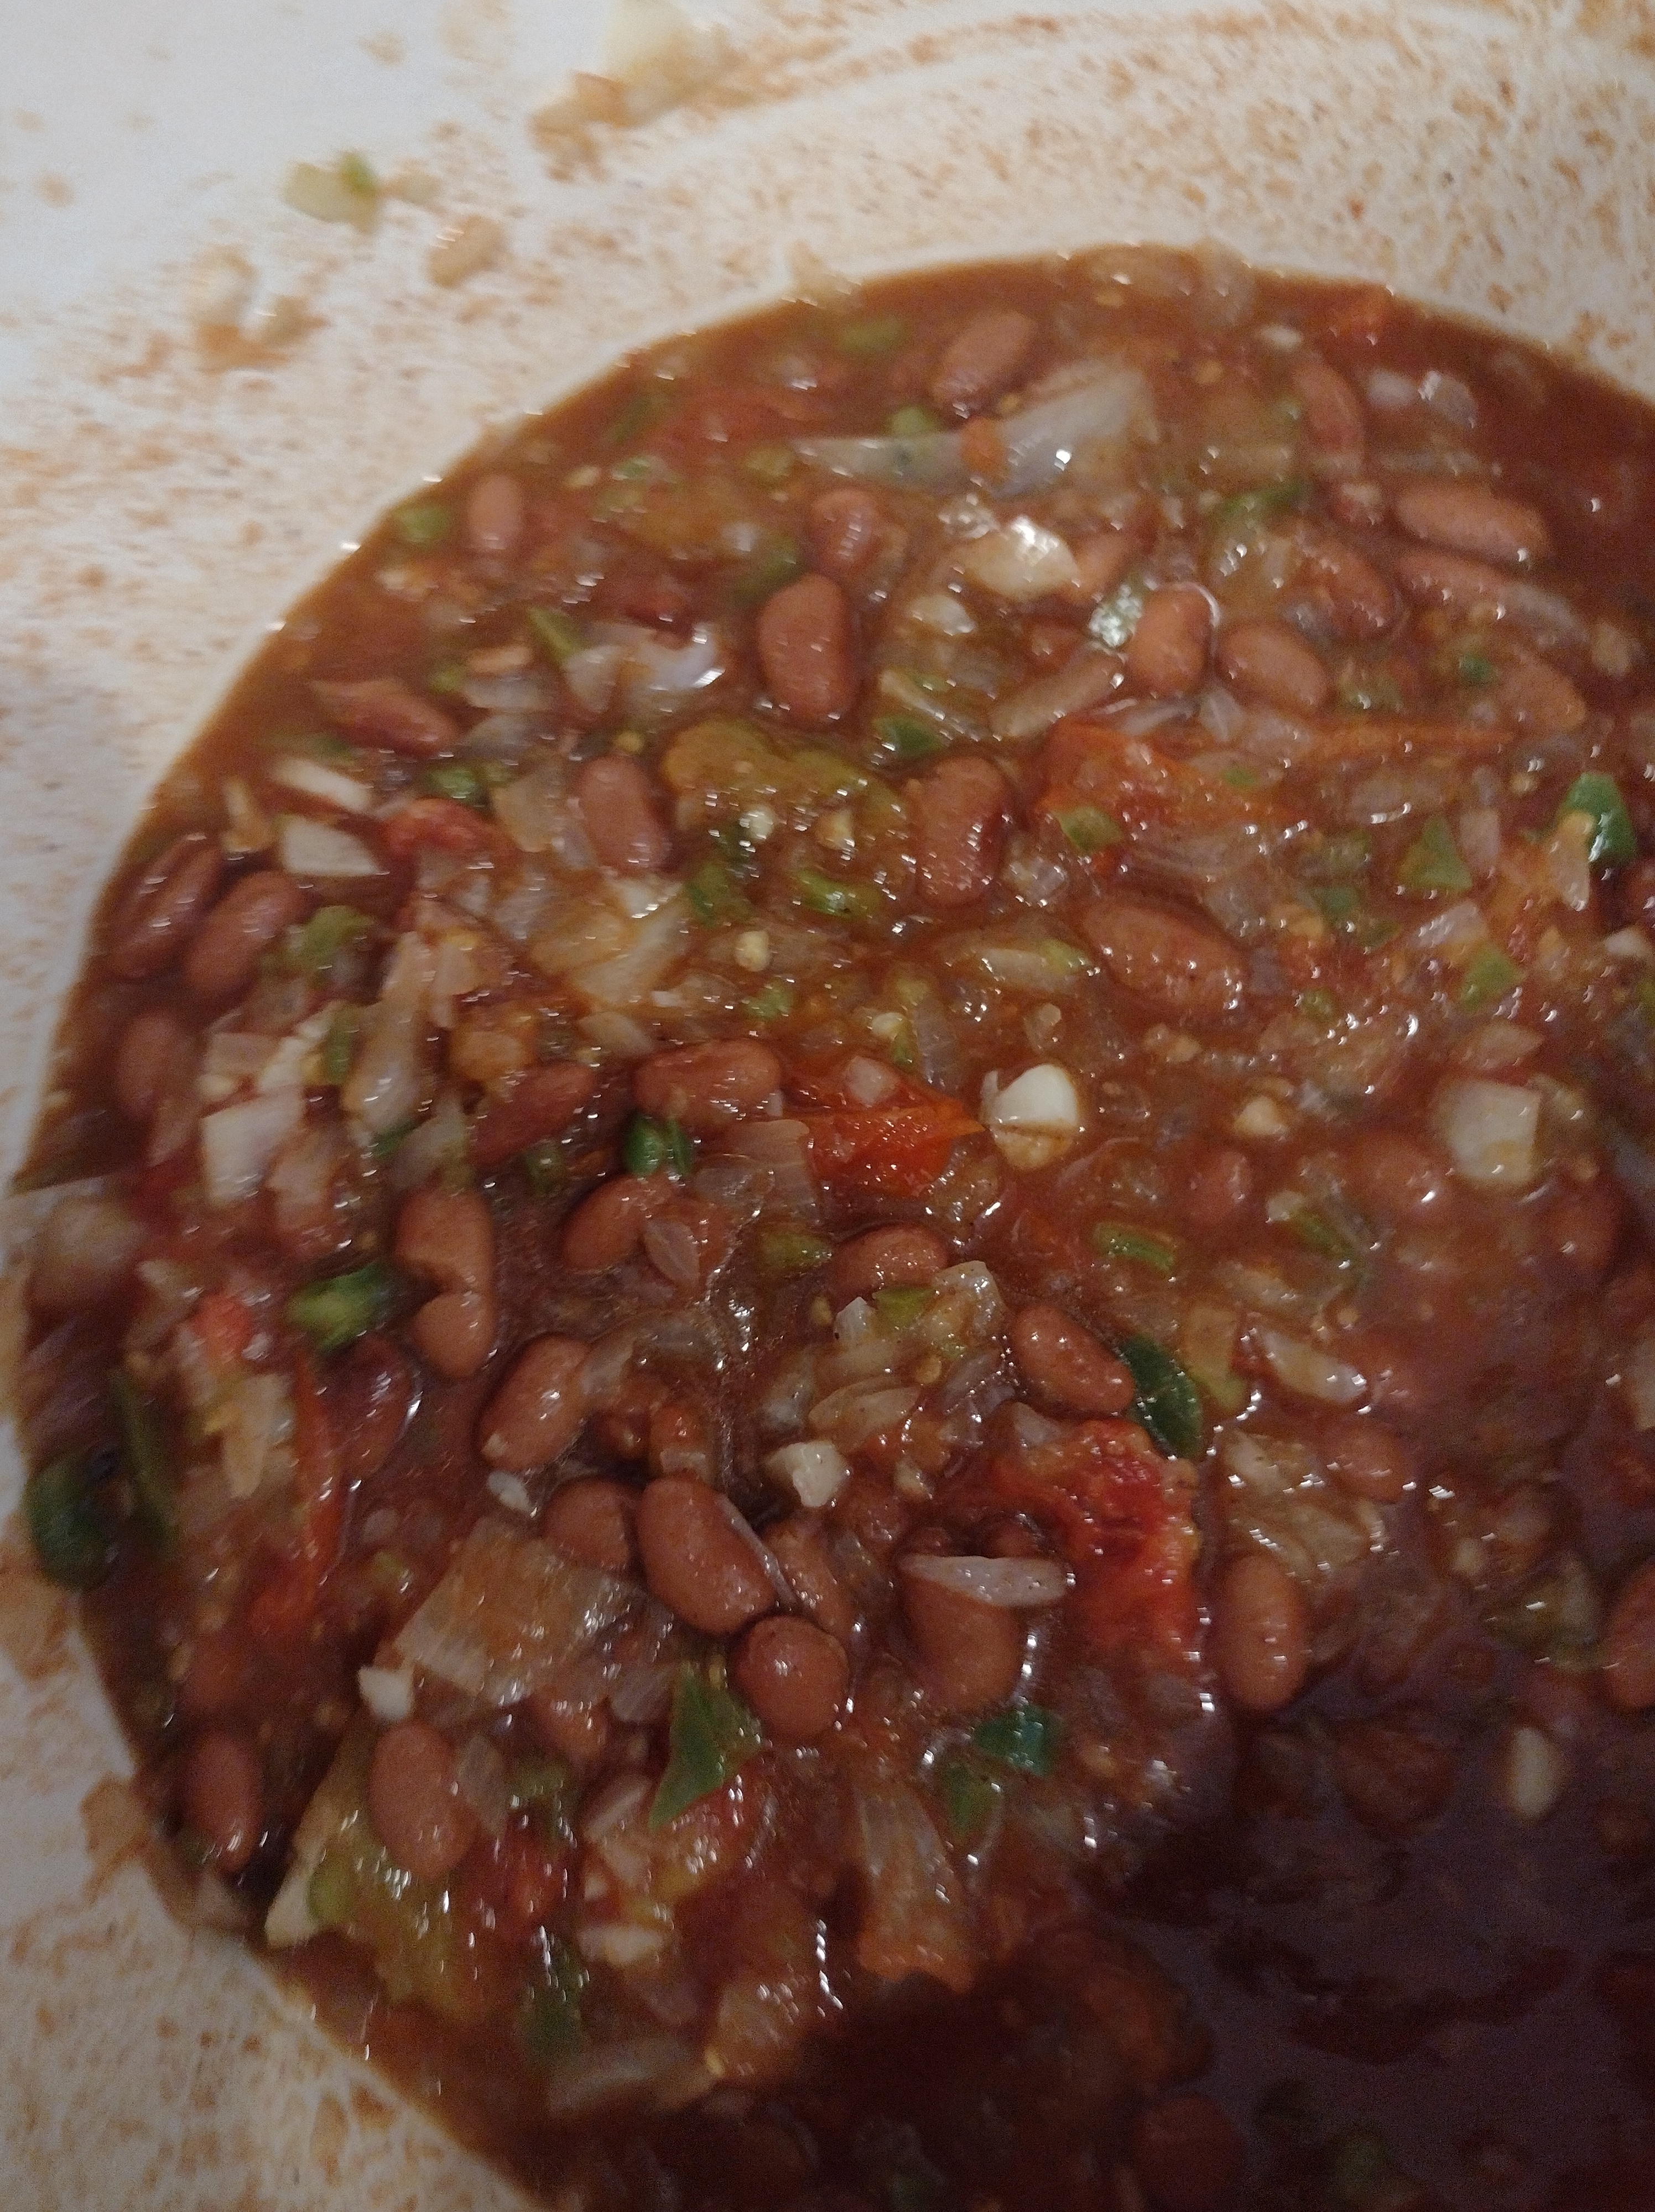 added chili beans, pre tomato juice